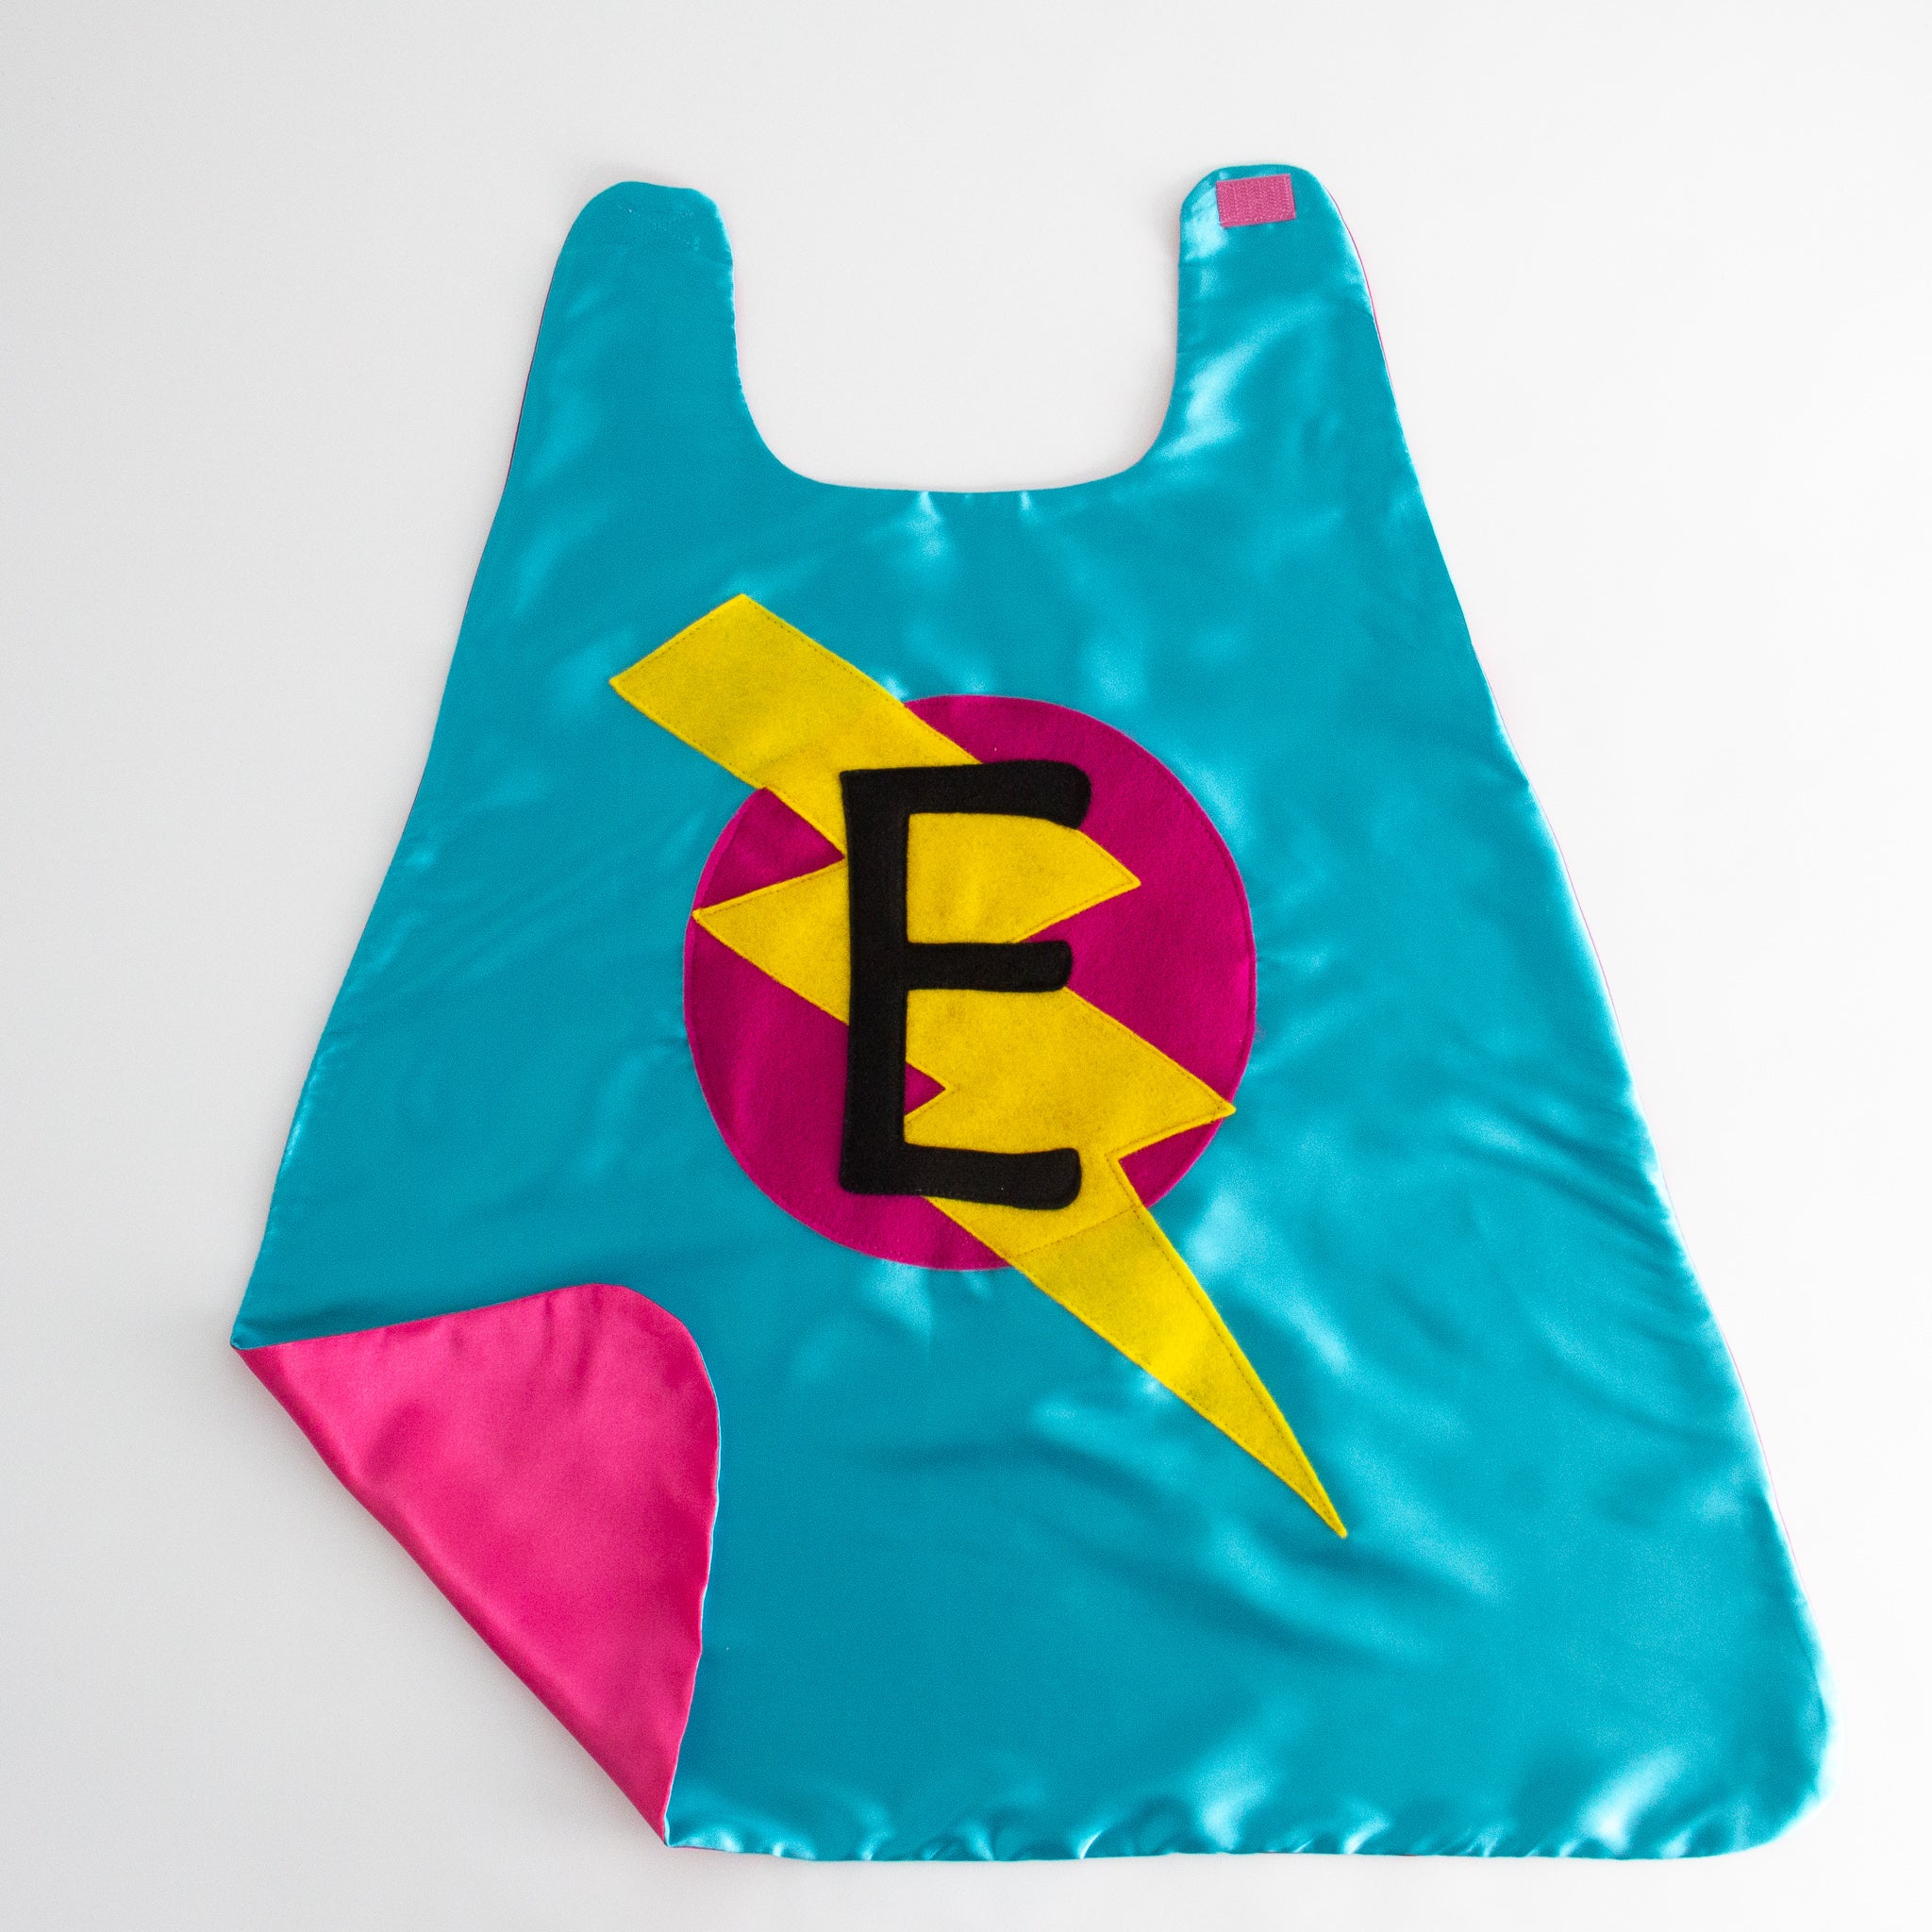 CUSTOM SUPERHERO CAPE - TURQUOISE/PINK - CHOOSE YOUR INTIAL